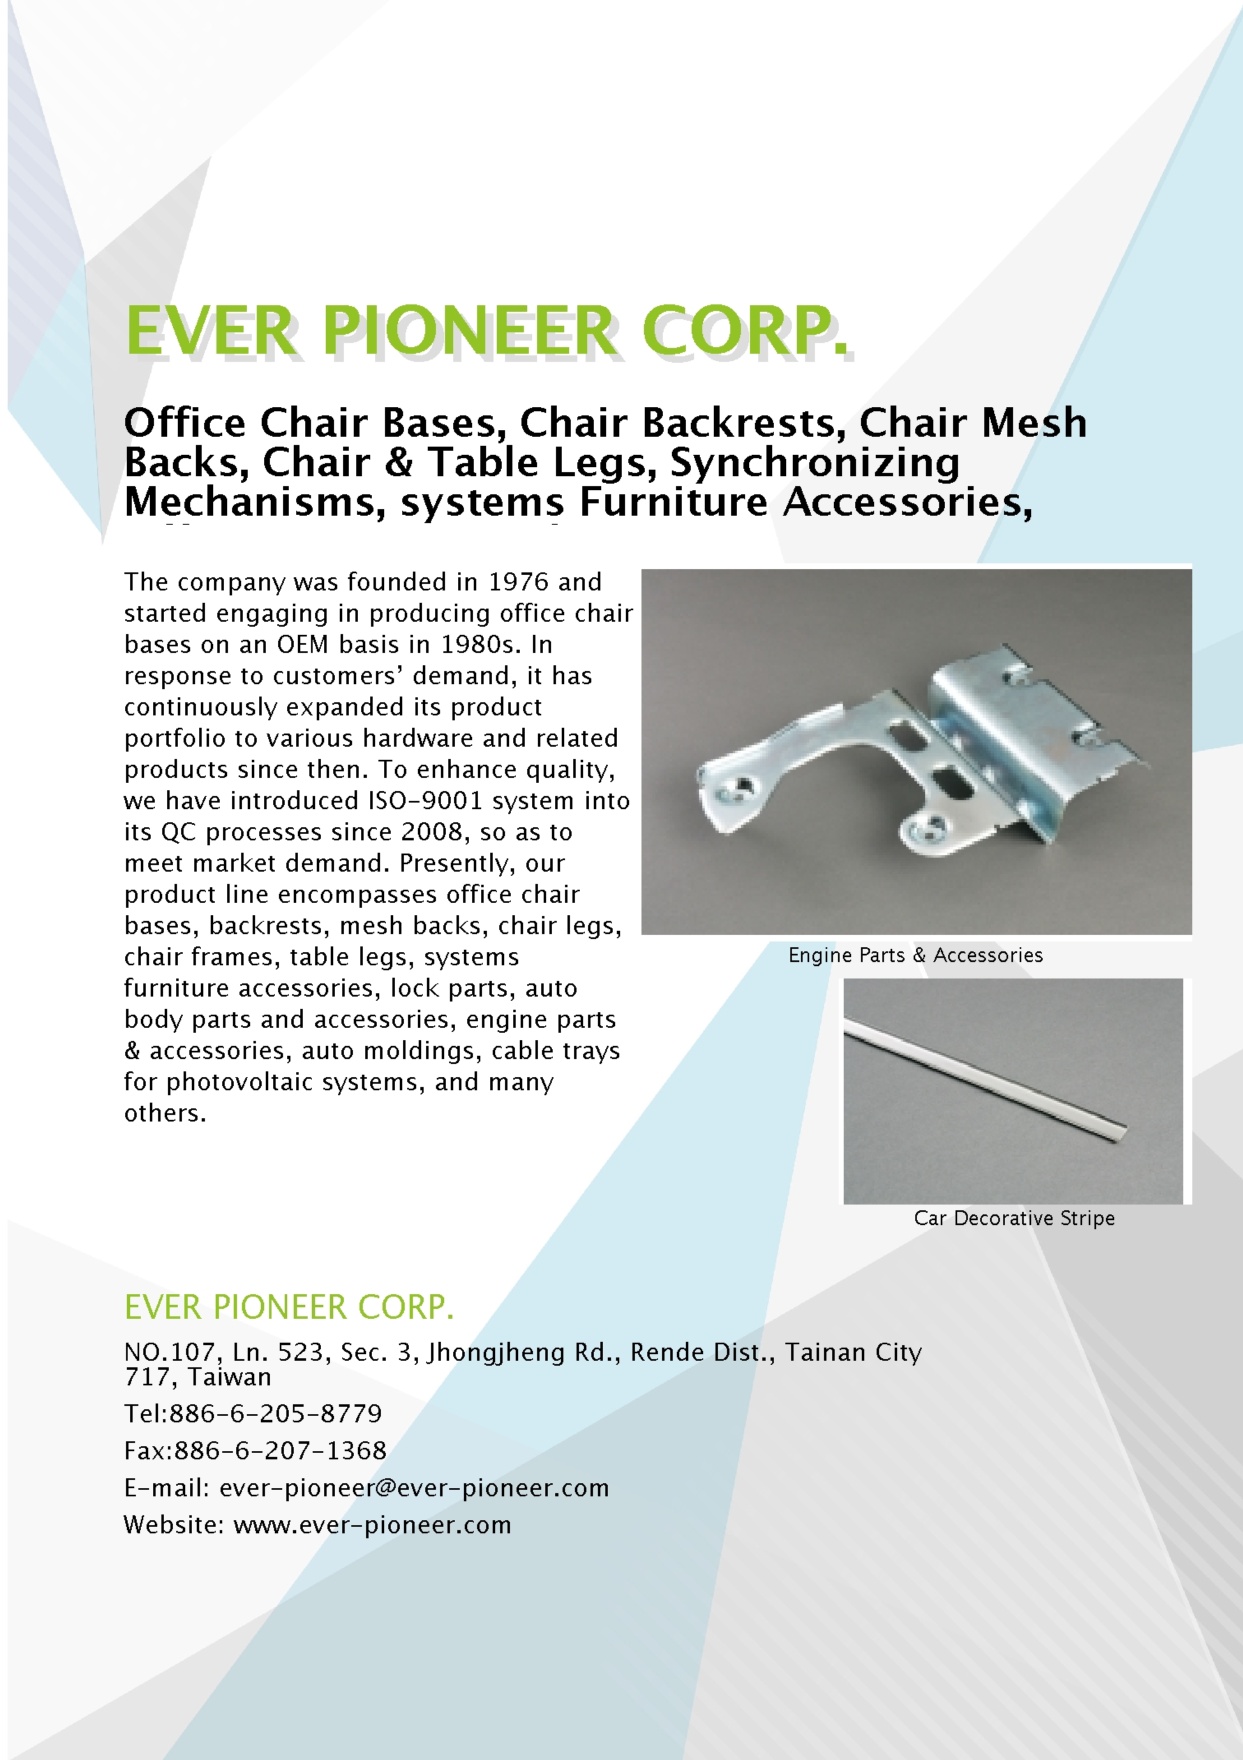 EVER PIONEER CORP.